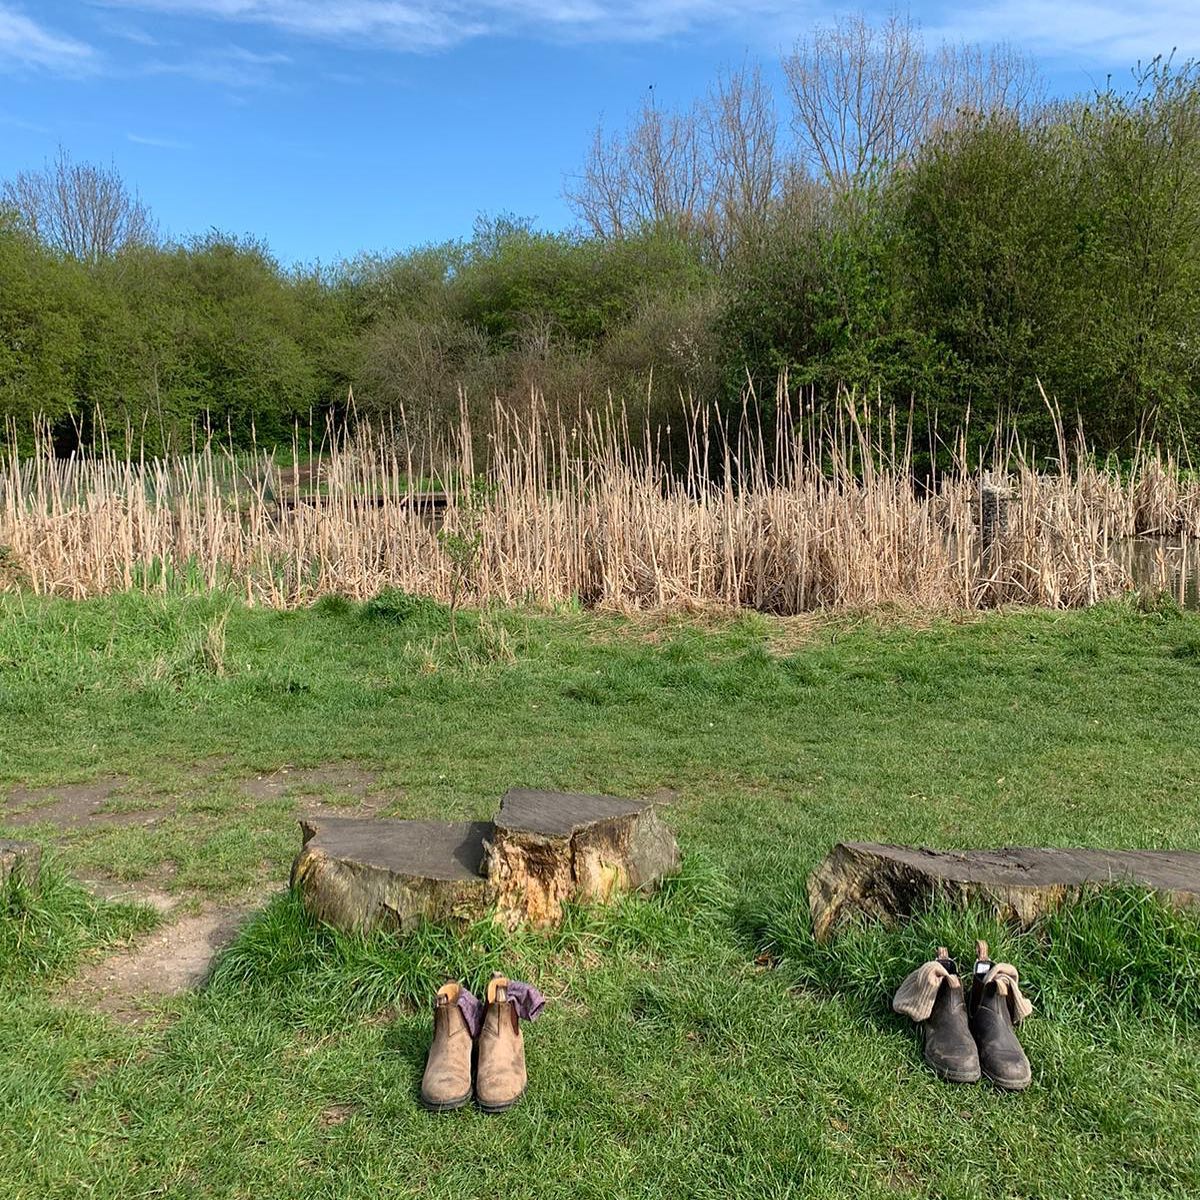 two pairs of socks and shoes placed on the ground in a field